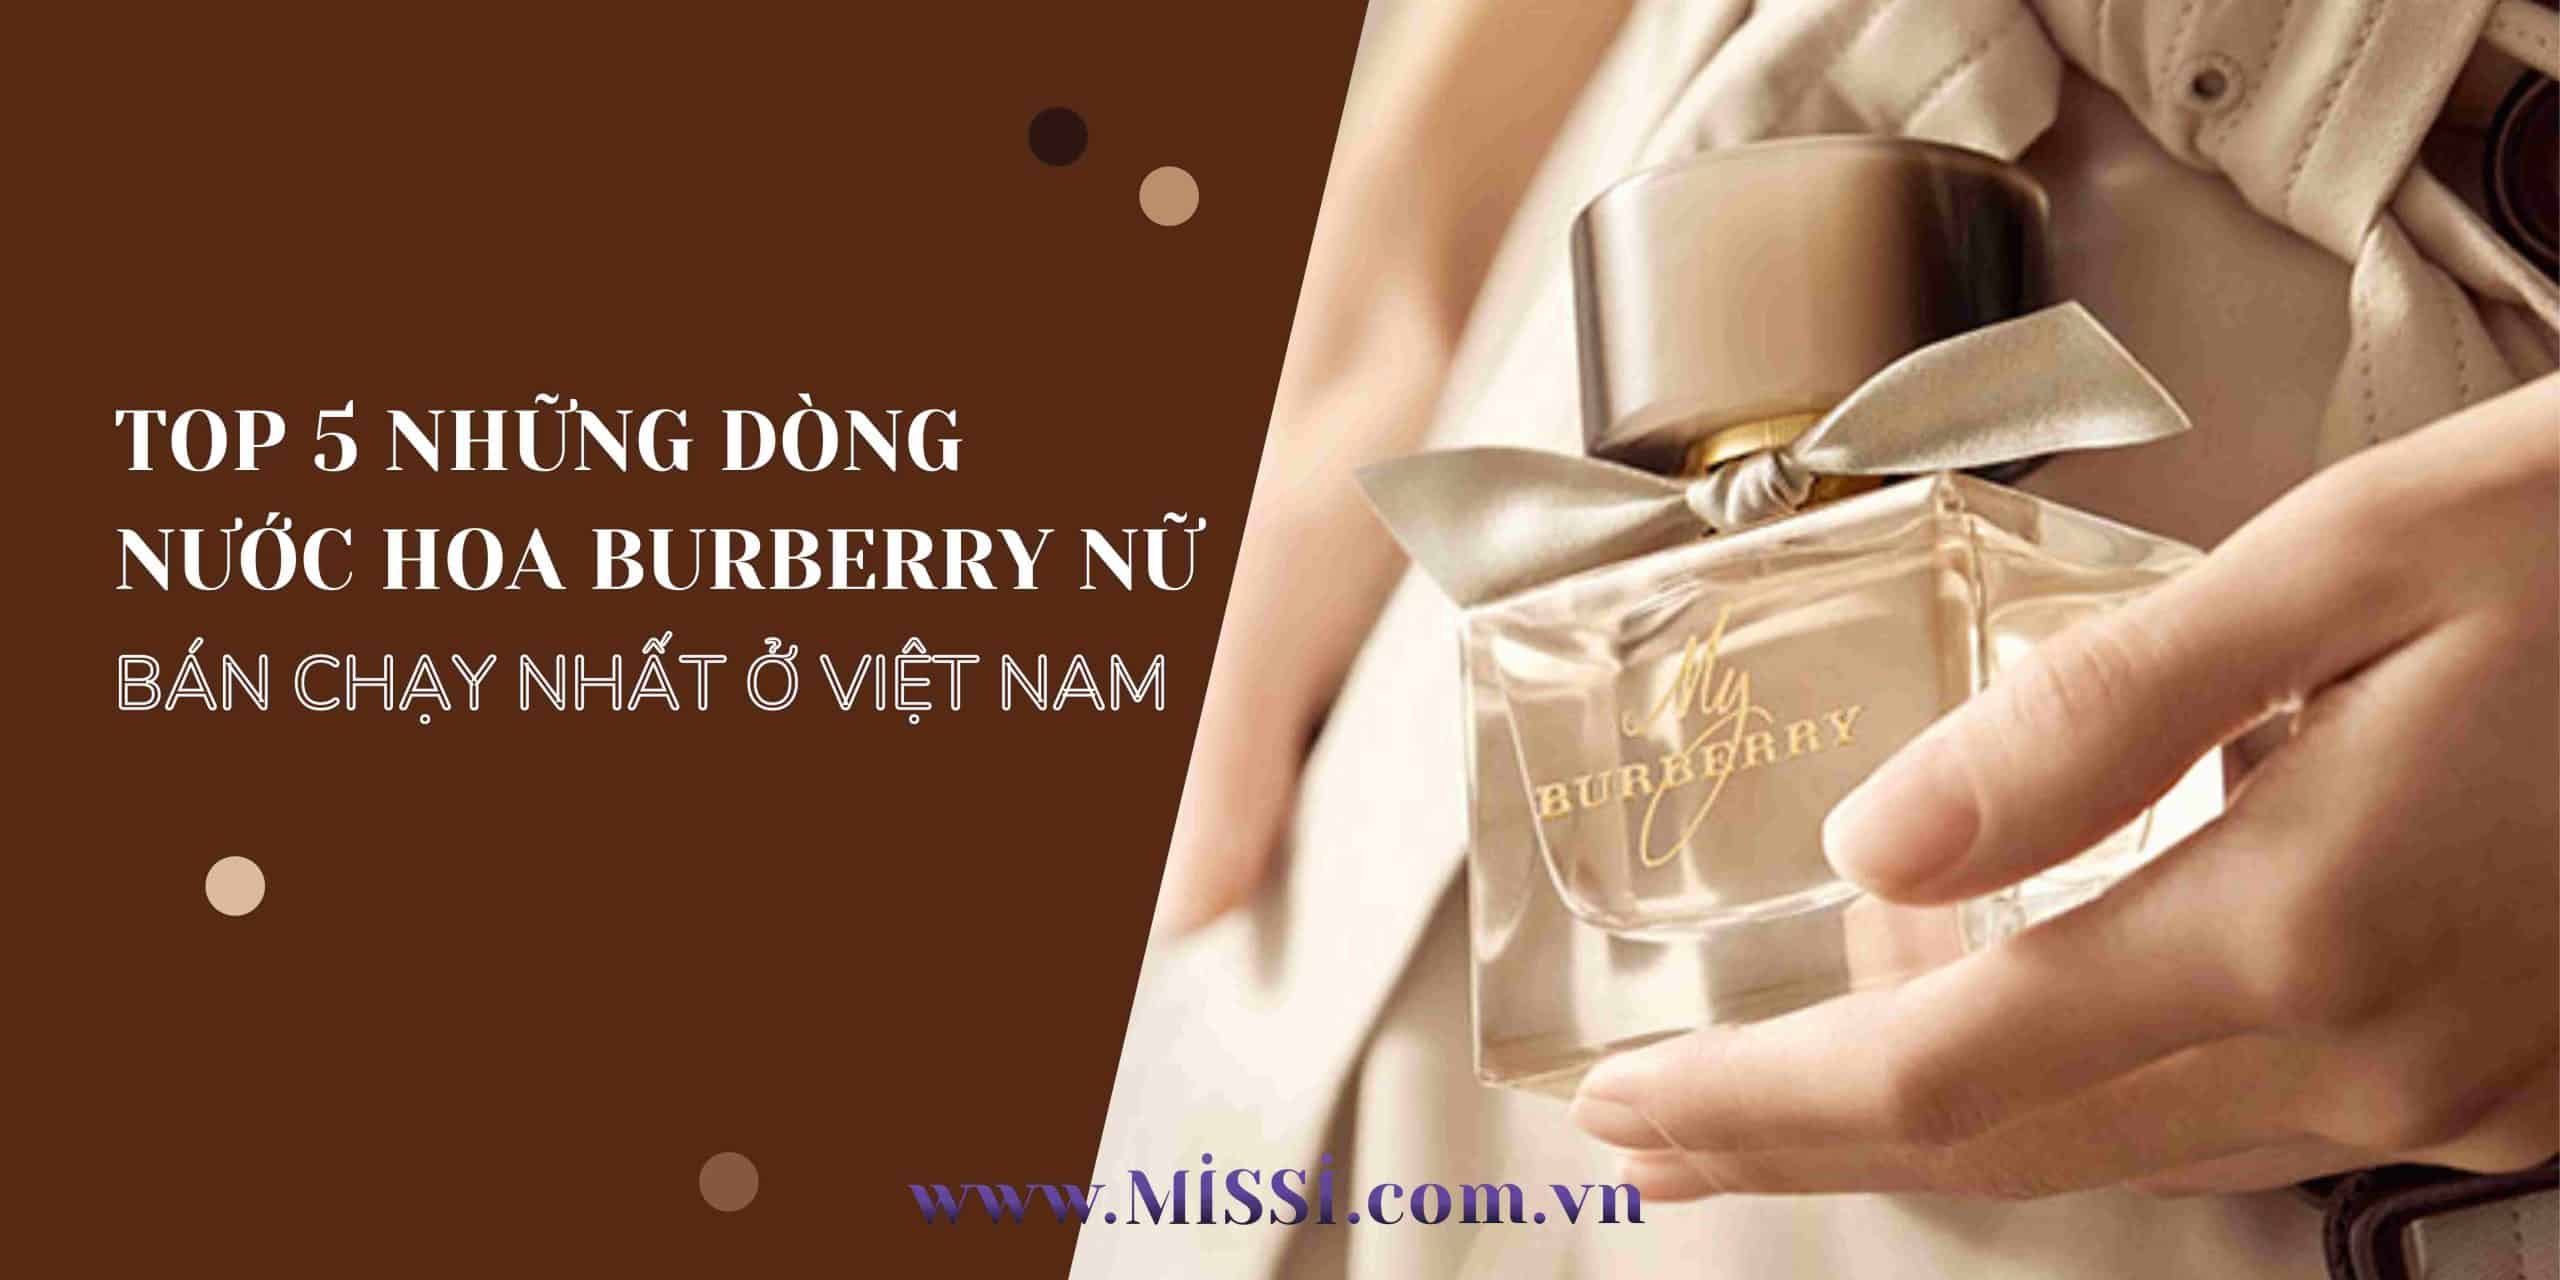 TOP 5 nhung dong nuoc hoa Burberry nu ban chay nhat o Viet Nam scaled